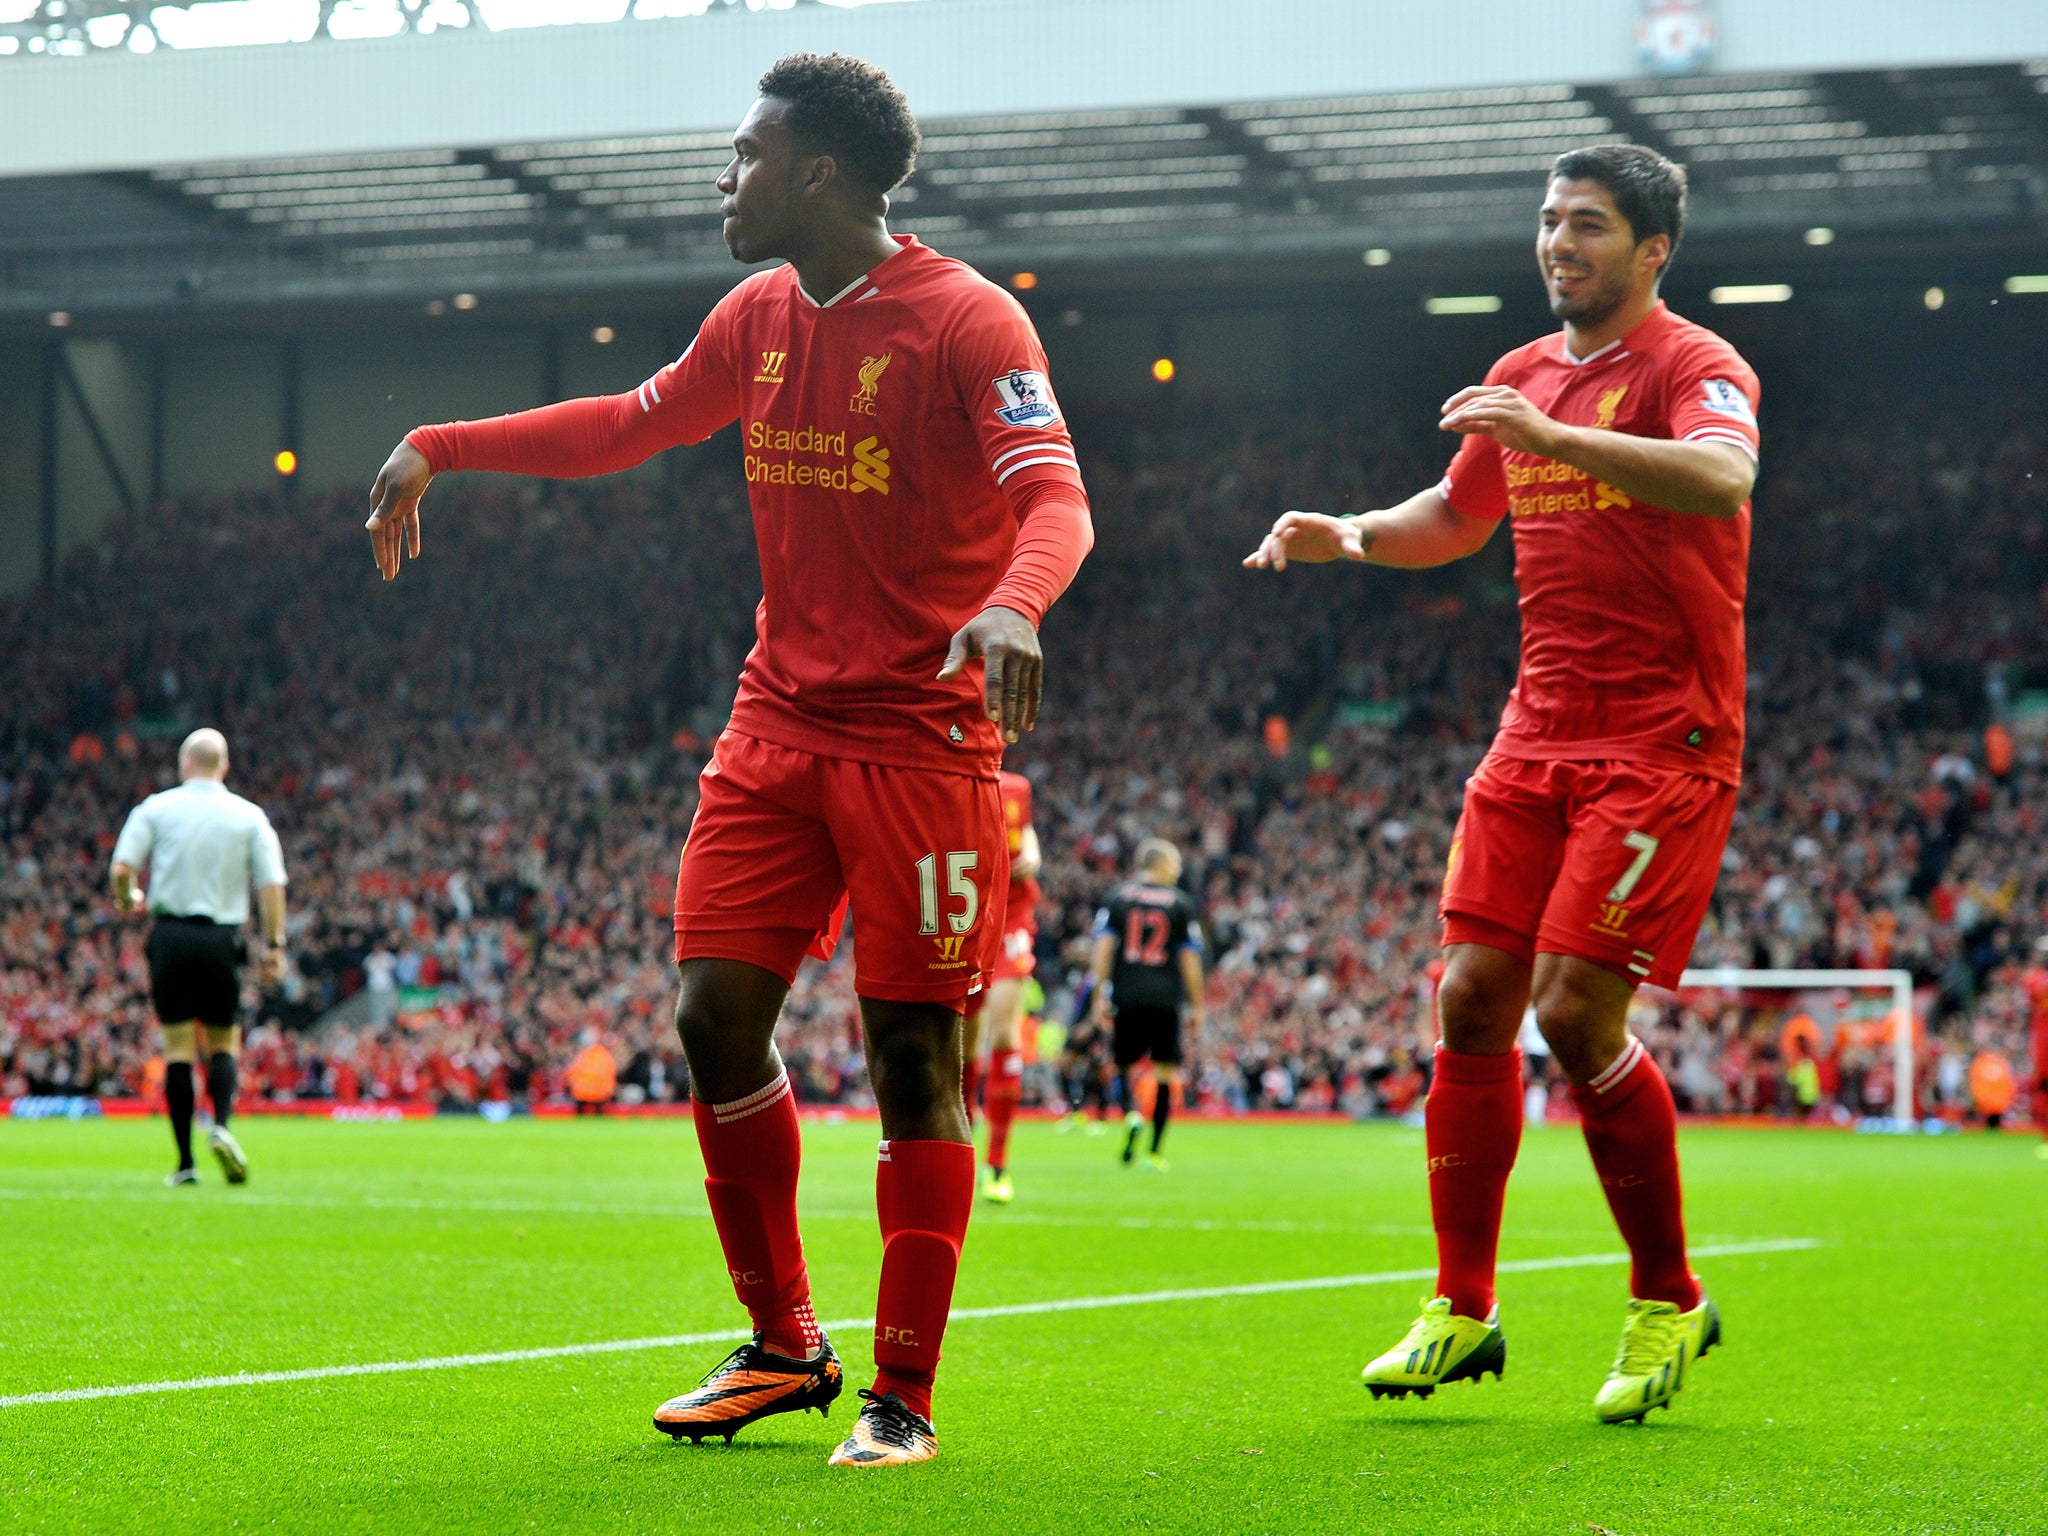 Daniel Sturridge and Luis Suarez celebrate after Liverpool go 2-0 up against Crystal Palace on Saturday